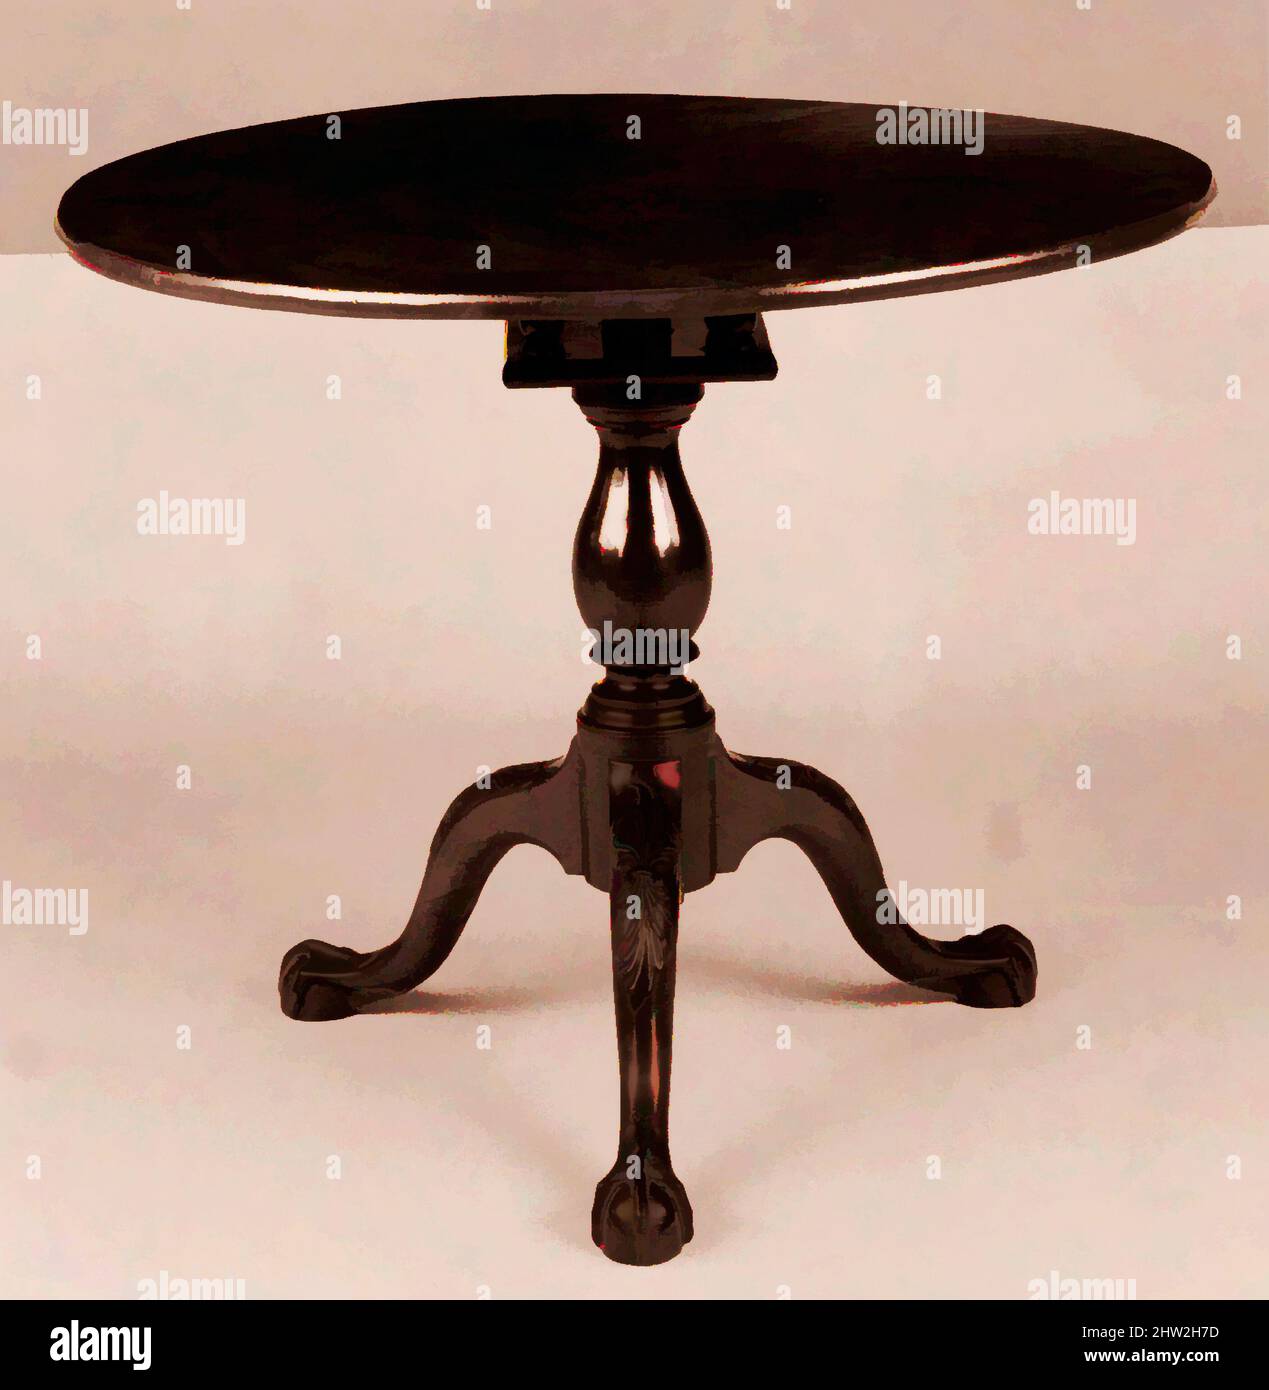 https://c8.alamy.com/comp/2HW2H7D/art-inspired-by-tea-table-177090-possibly-made-in-albany-new-york-united-states-possibly-made-in-new-york-new-york-united-states-american-mahogany-28-x-36-x-25-12-in-711-x-914-x-648-cm-furniture-classic-works-modernized-by-artotop-with-a-splash-of-modernity-shapes-color-and-value-eye-catching-visual-impact-on-art-emotions-through-freedom-of-artworks-in-a-contemporary-way-a-timeless-message-pursuing-a-wildly-creative-new-direction-artists-turning-to-the-digital-medium-and-creating-the-artotop-nft-2HW2H7D.jpg